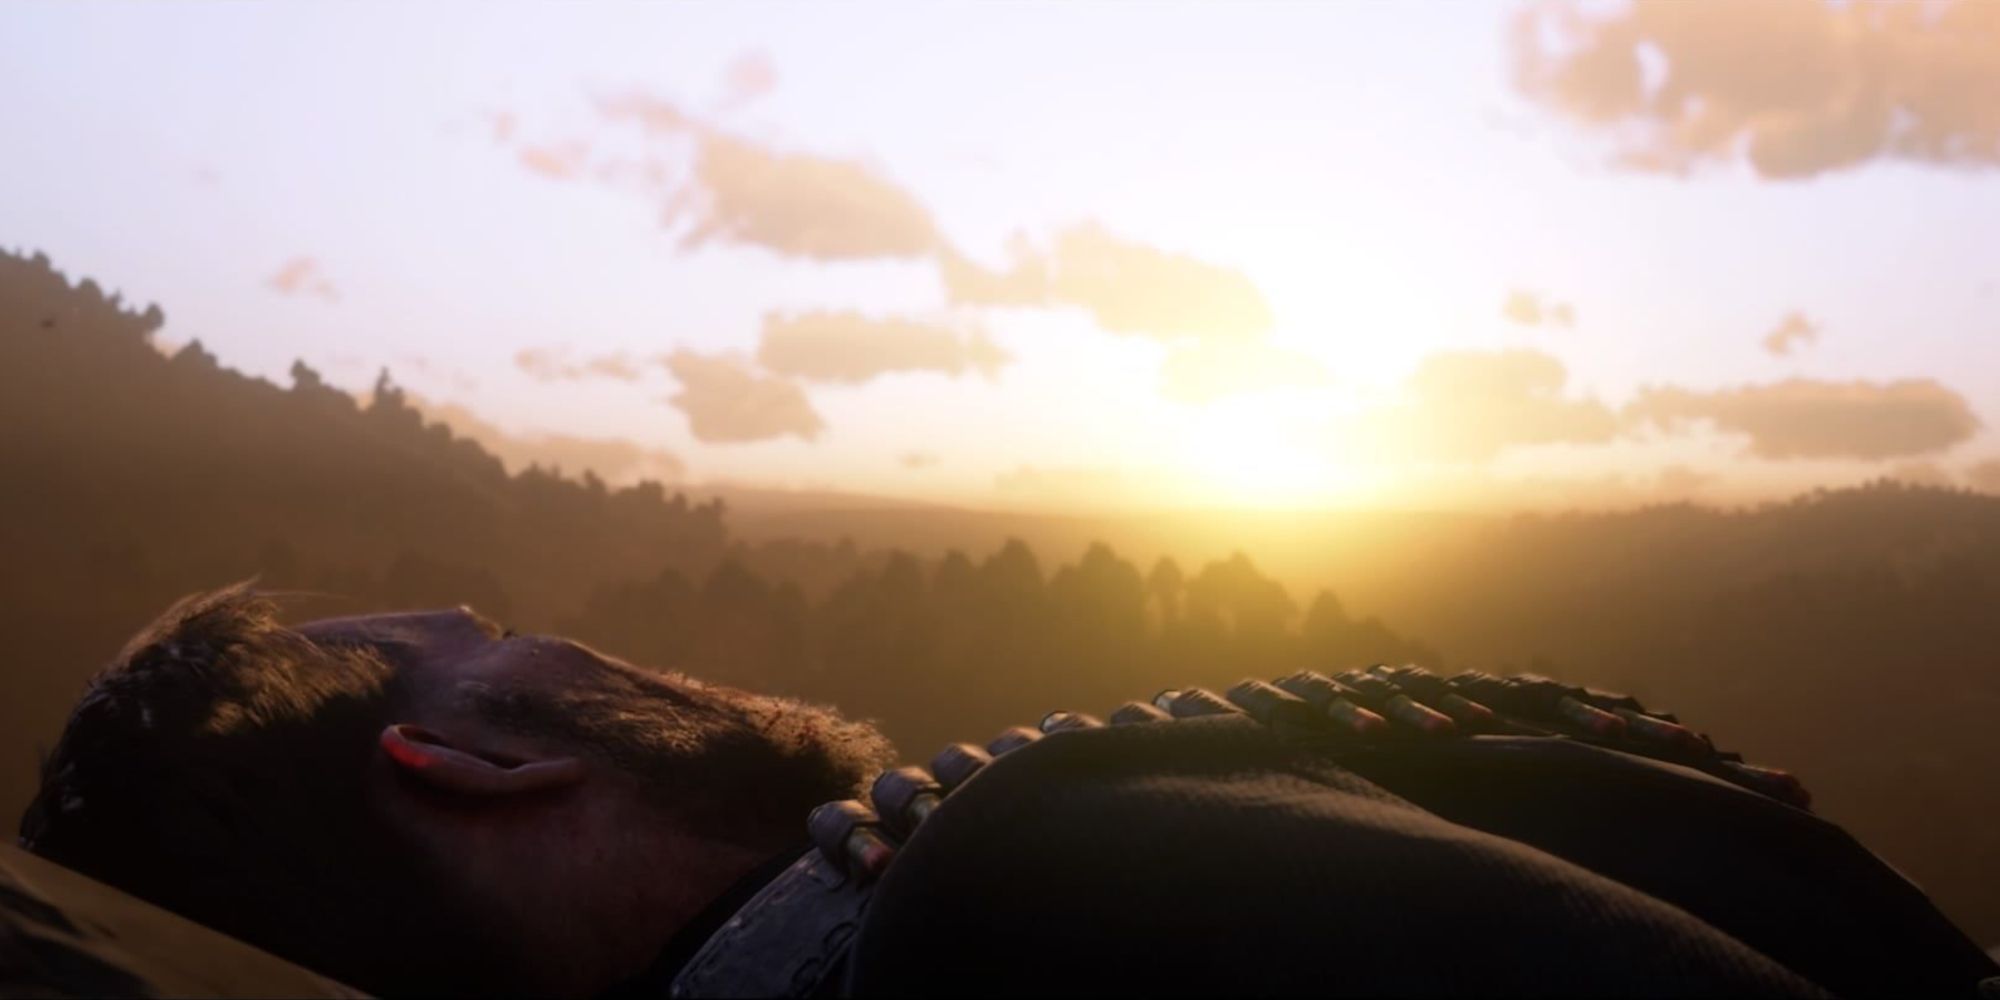 Red Dead Redemption 2 Ending sees Arthur die a hard death no matter how many repairs he made